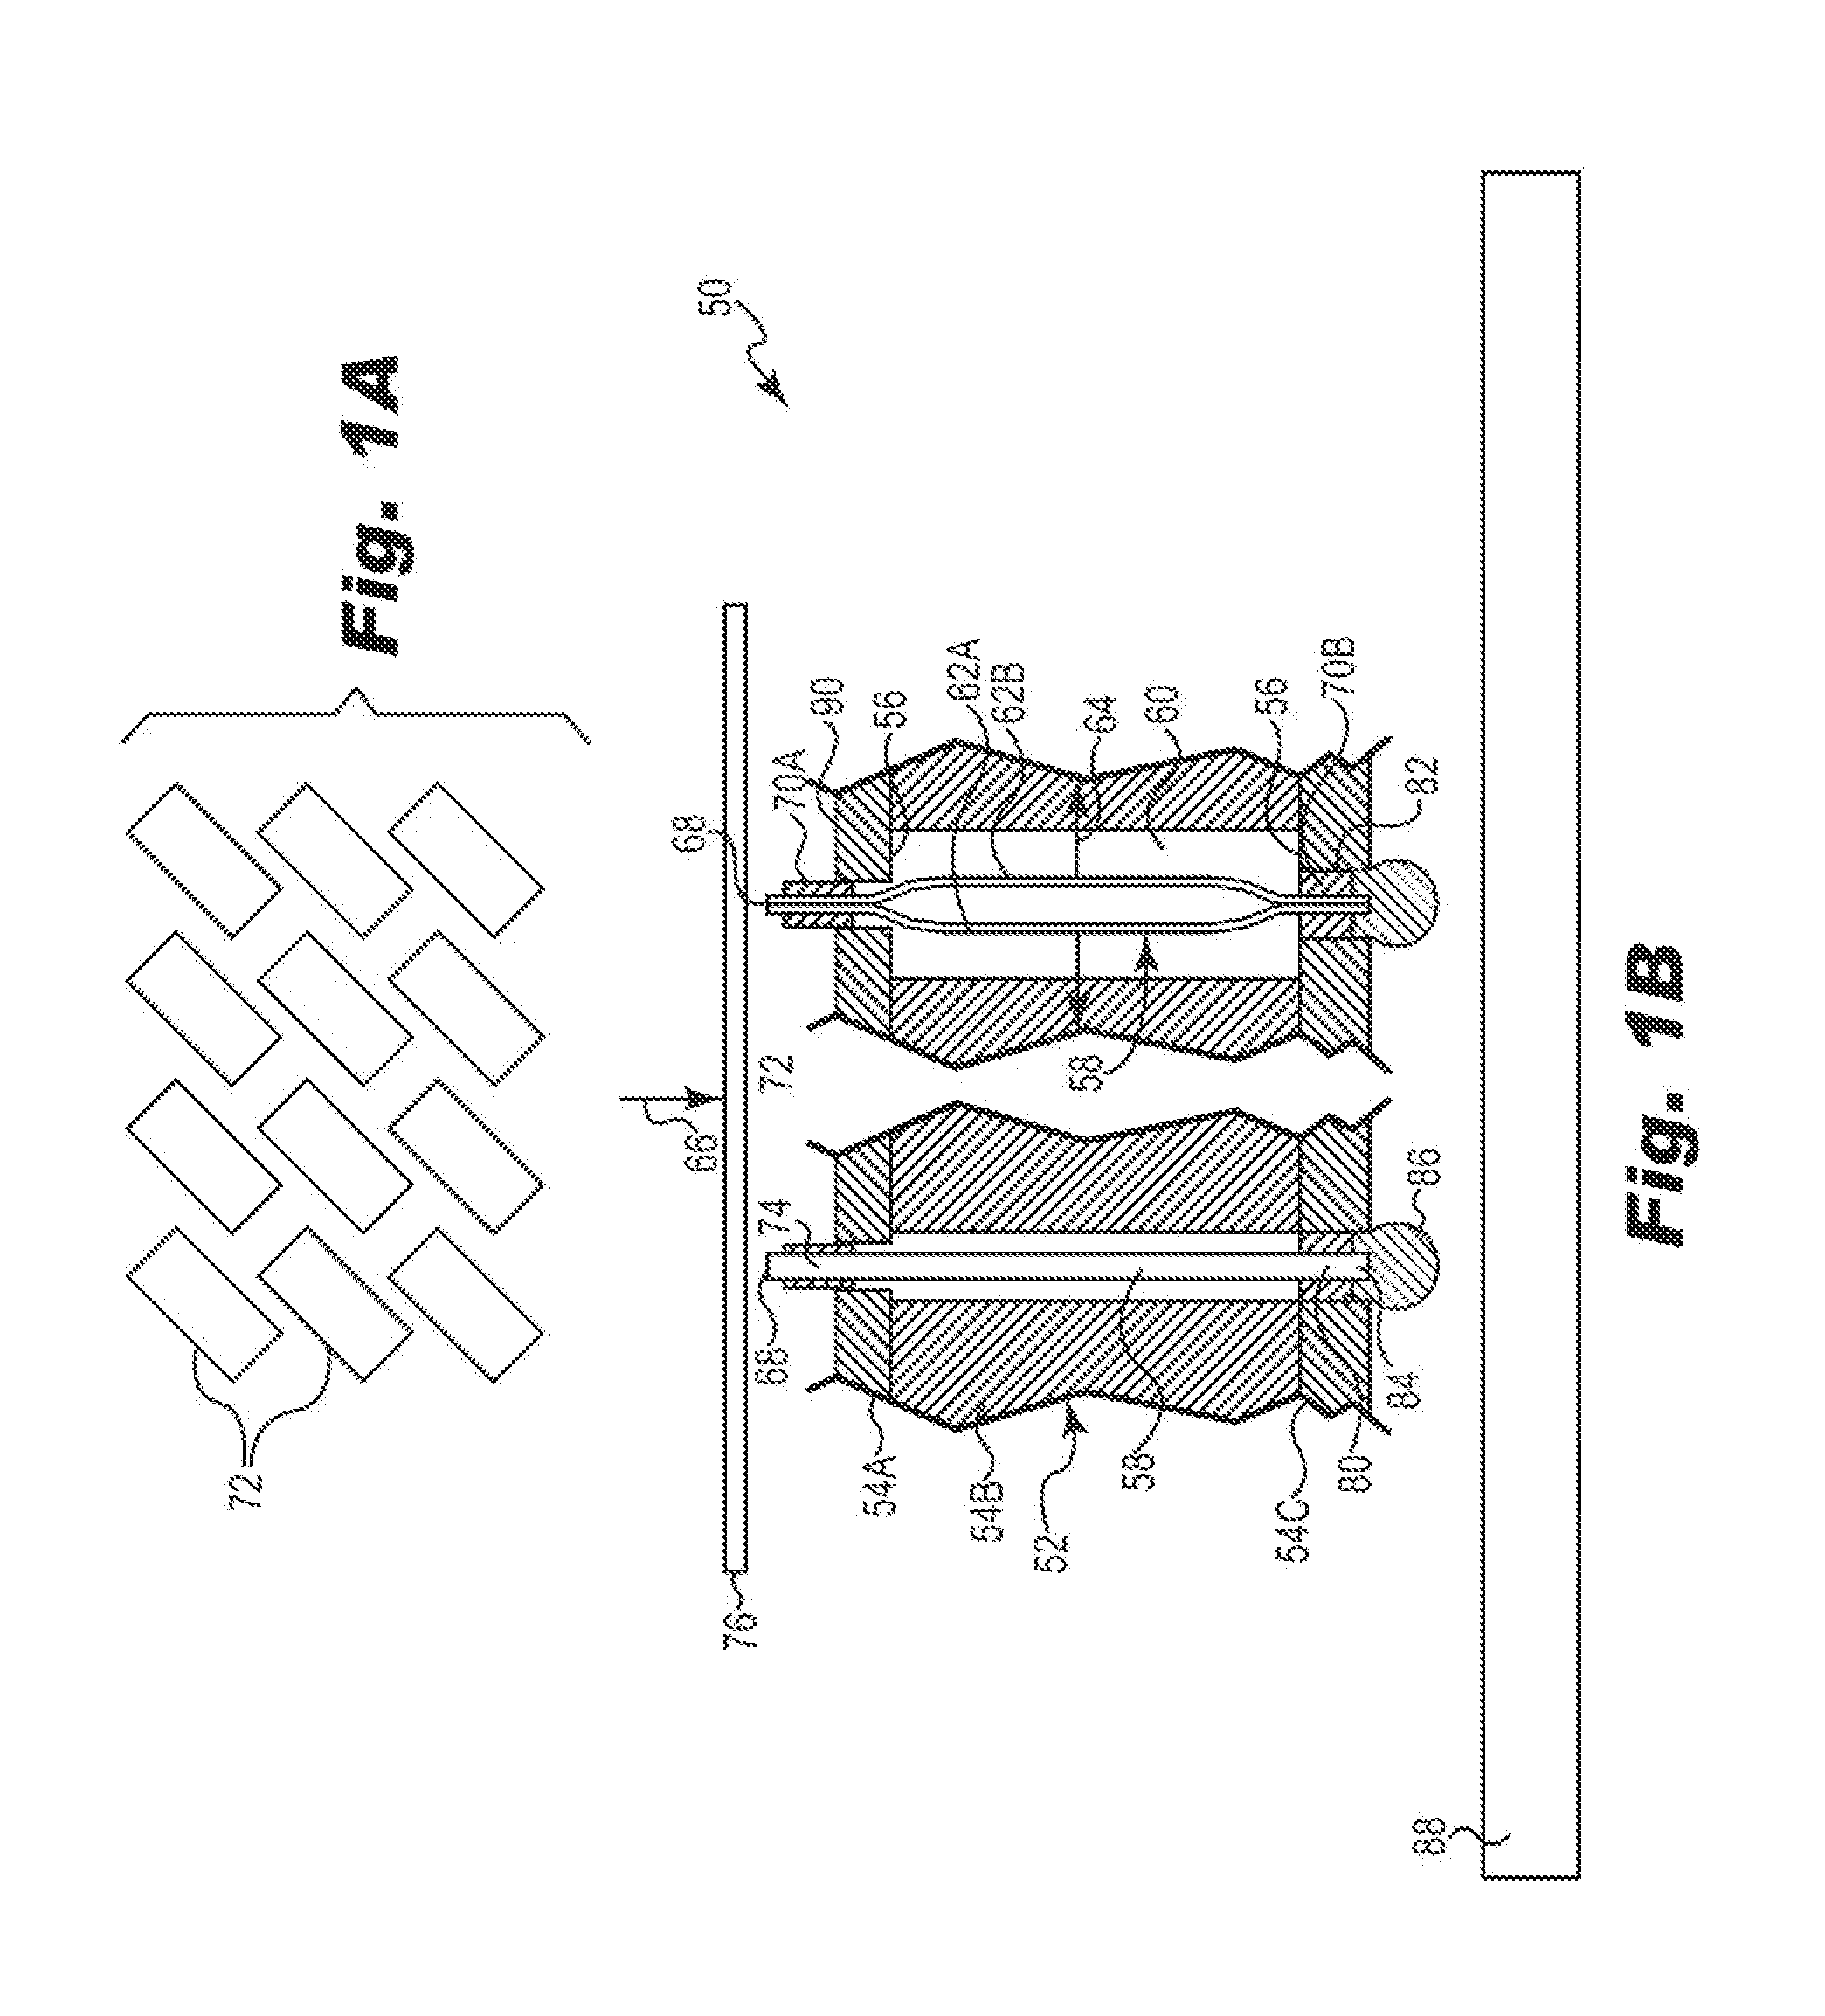 Electrical interconnect IC device socket